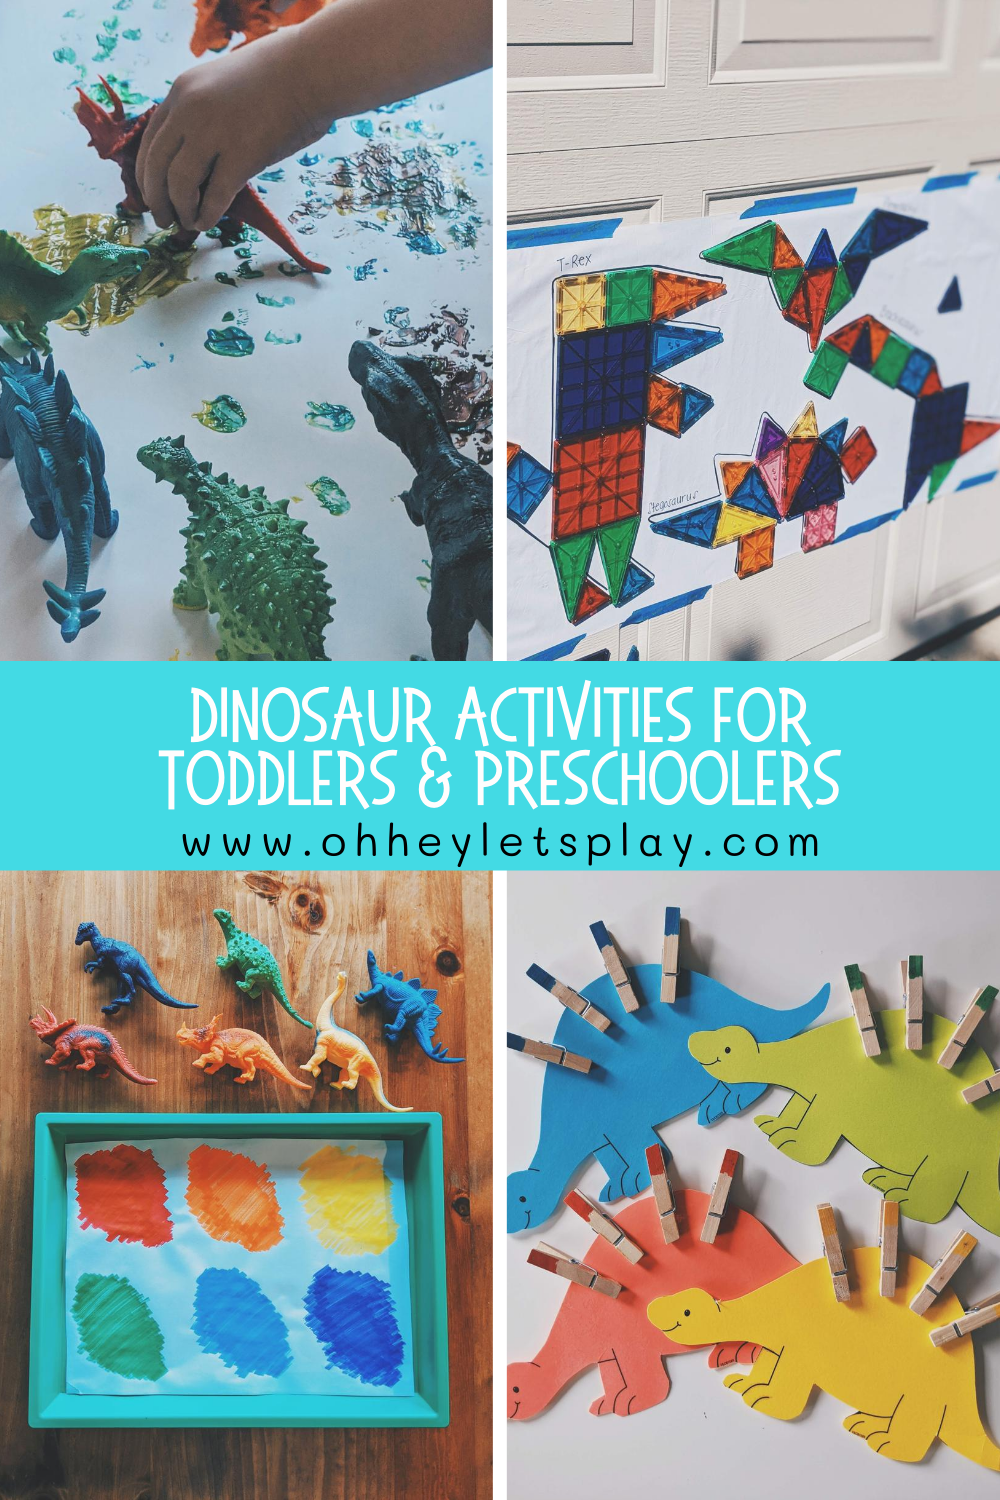 Dinosaur Activities for Toddlers and Preschoolers — Oh Hey Let's Play